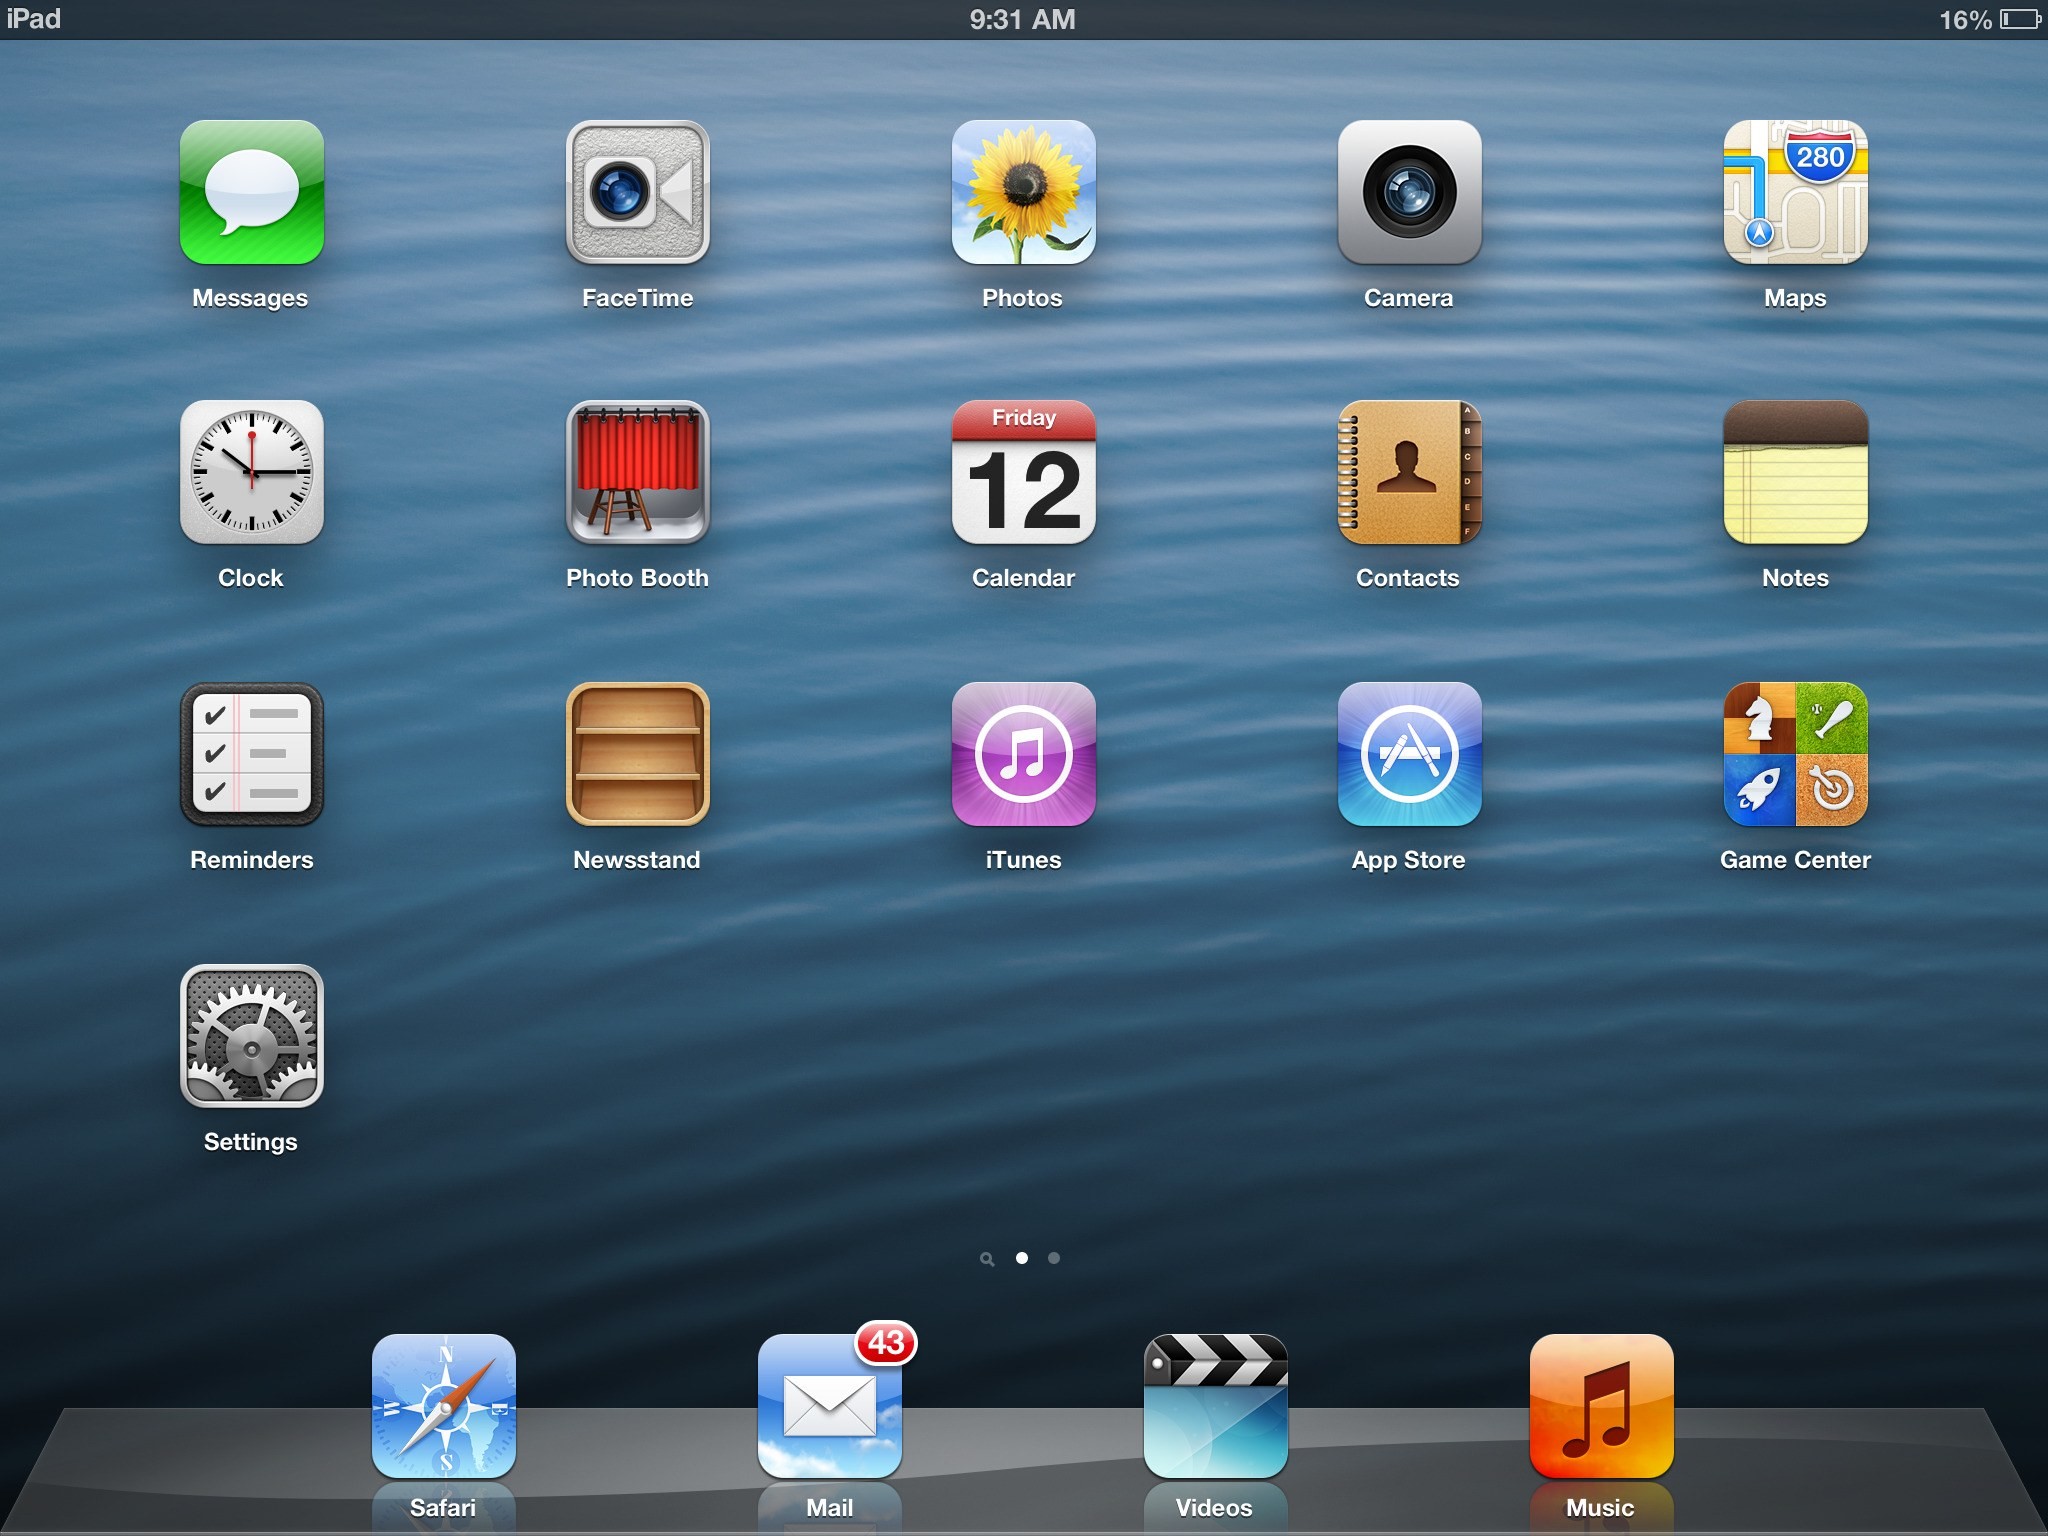 2048x1536 The use of the SBB-designed clock icon in iOS 6 on the iPad has been  licensed.